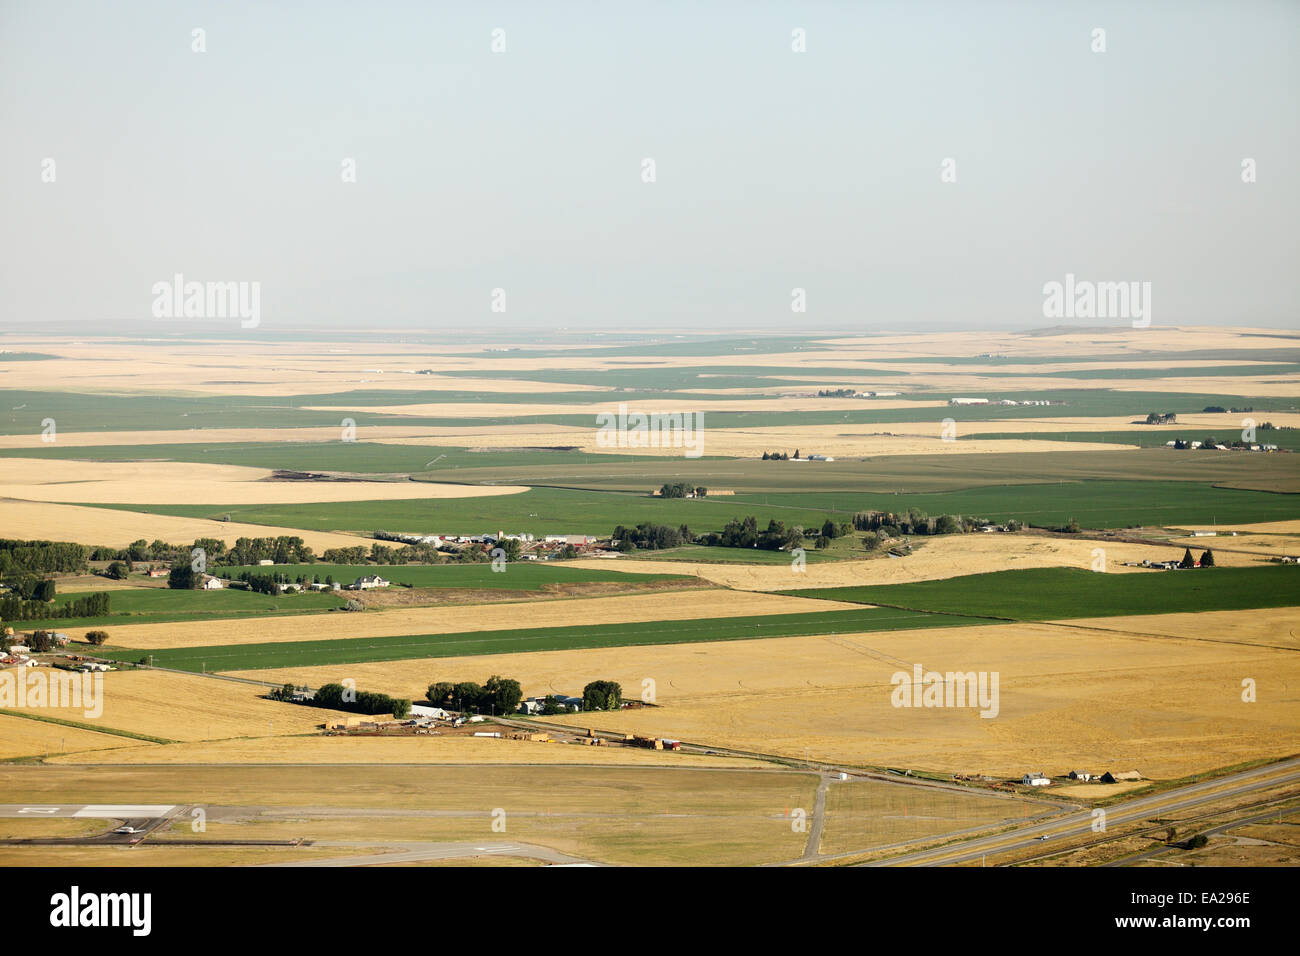 An aerial view of farmland with center pivot sprinklers and other agricultural irrigation methods. Stock Photo